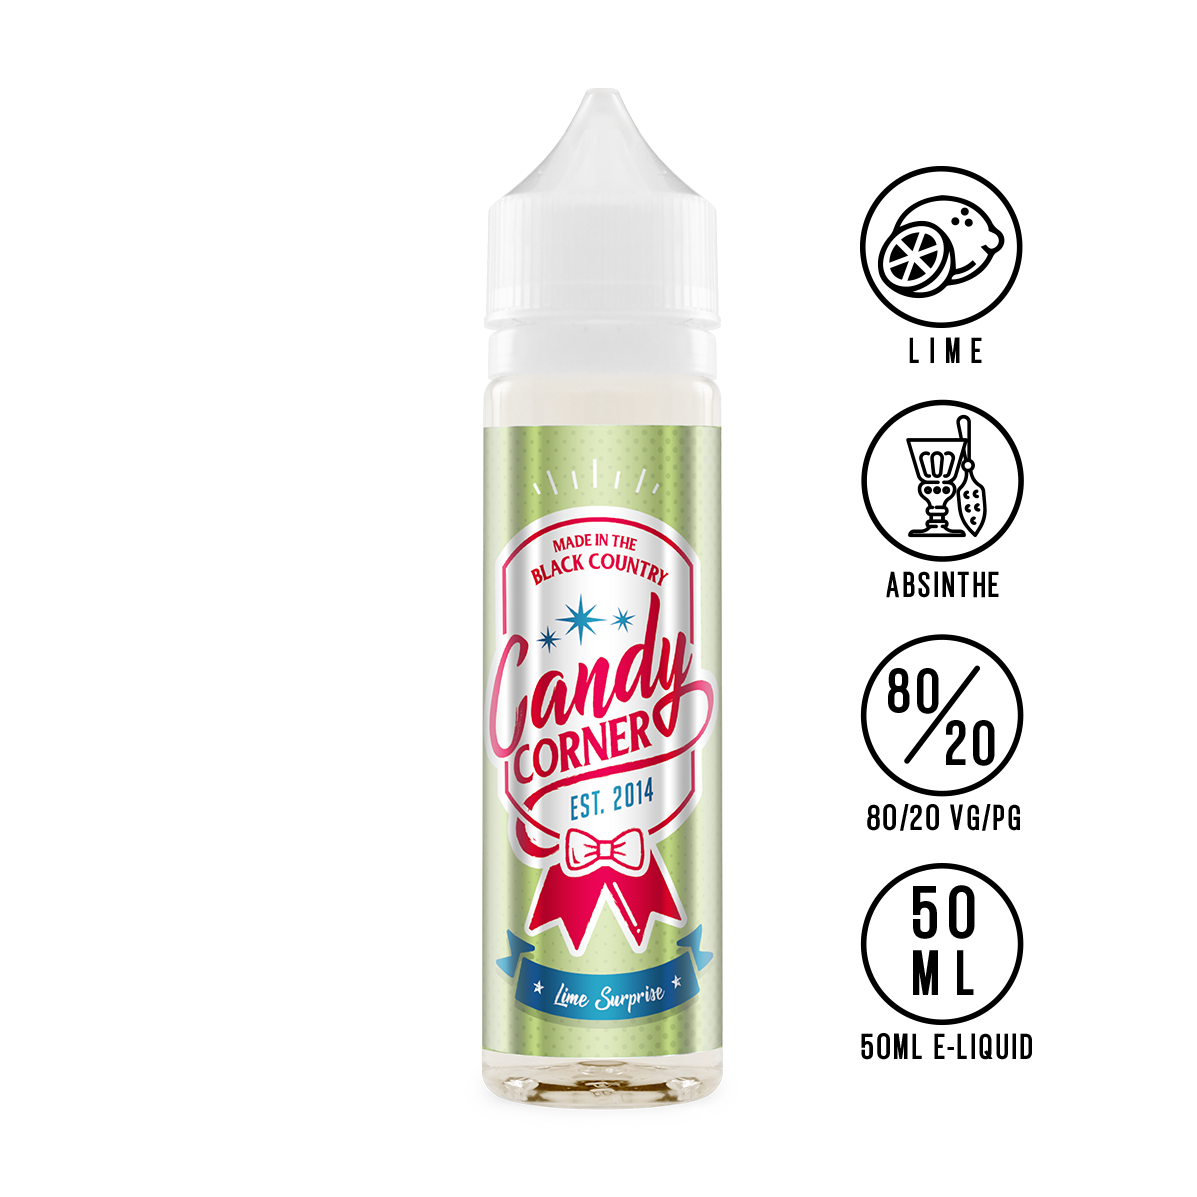 Candy Corner - Lime Surprise 50ml - The Ace Of Vapez